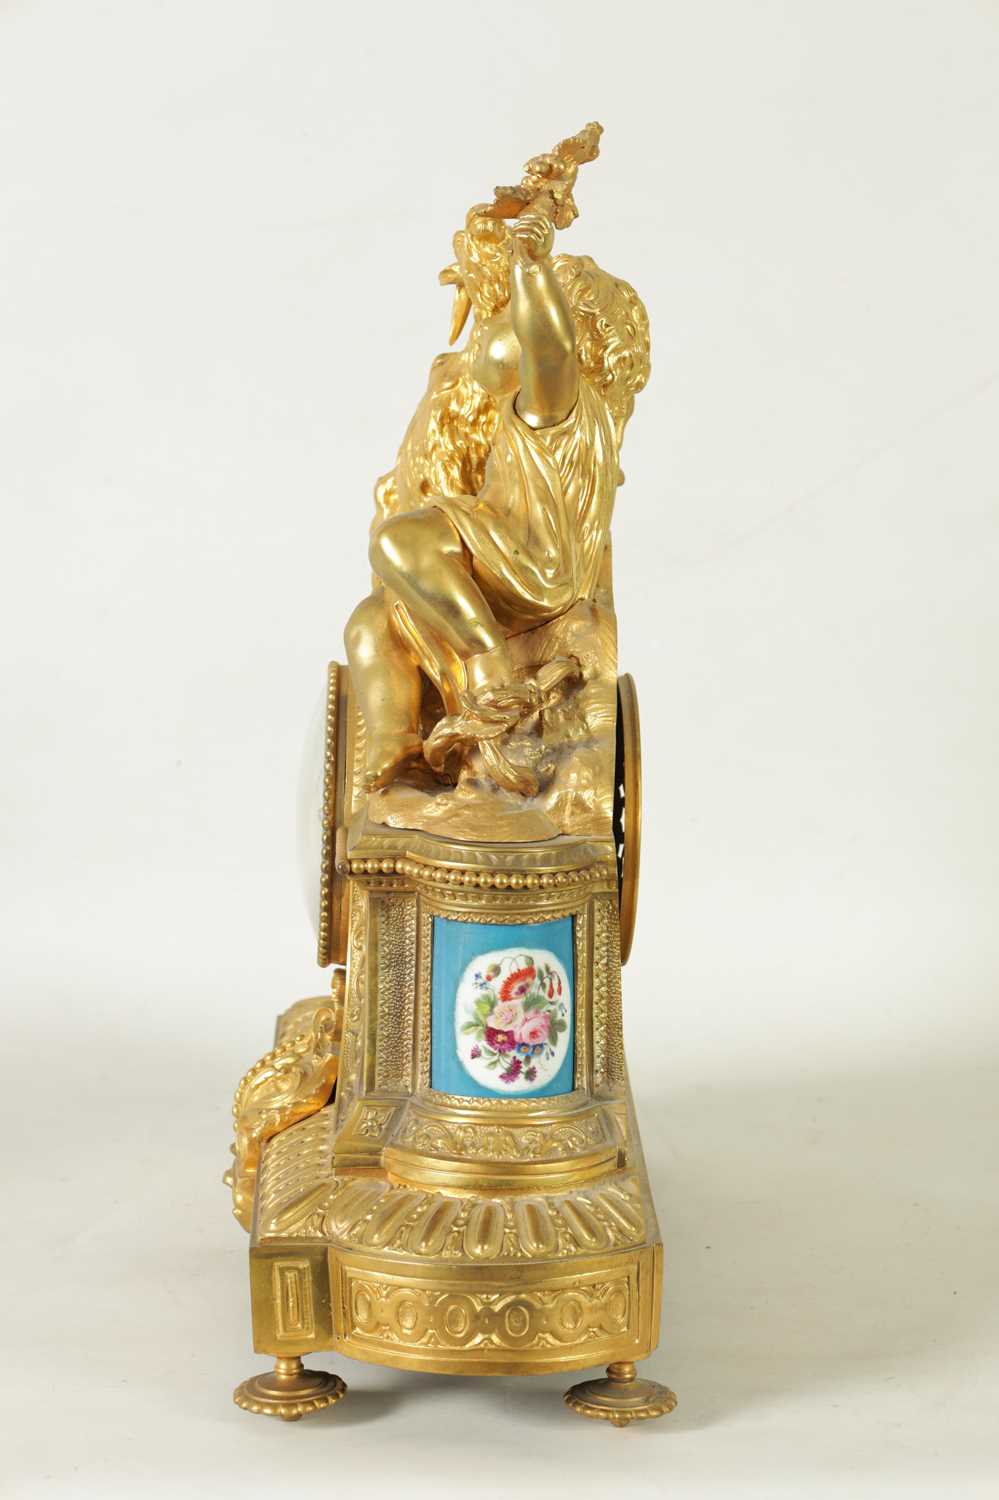 CHARLES OUDIN, A PARIS. A LATE 19TH CENTURY FRENCH ORMOLU AND PORCELAIN PANELLED MANTEL CLOCK - Image 8 of 11